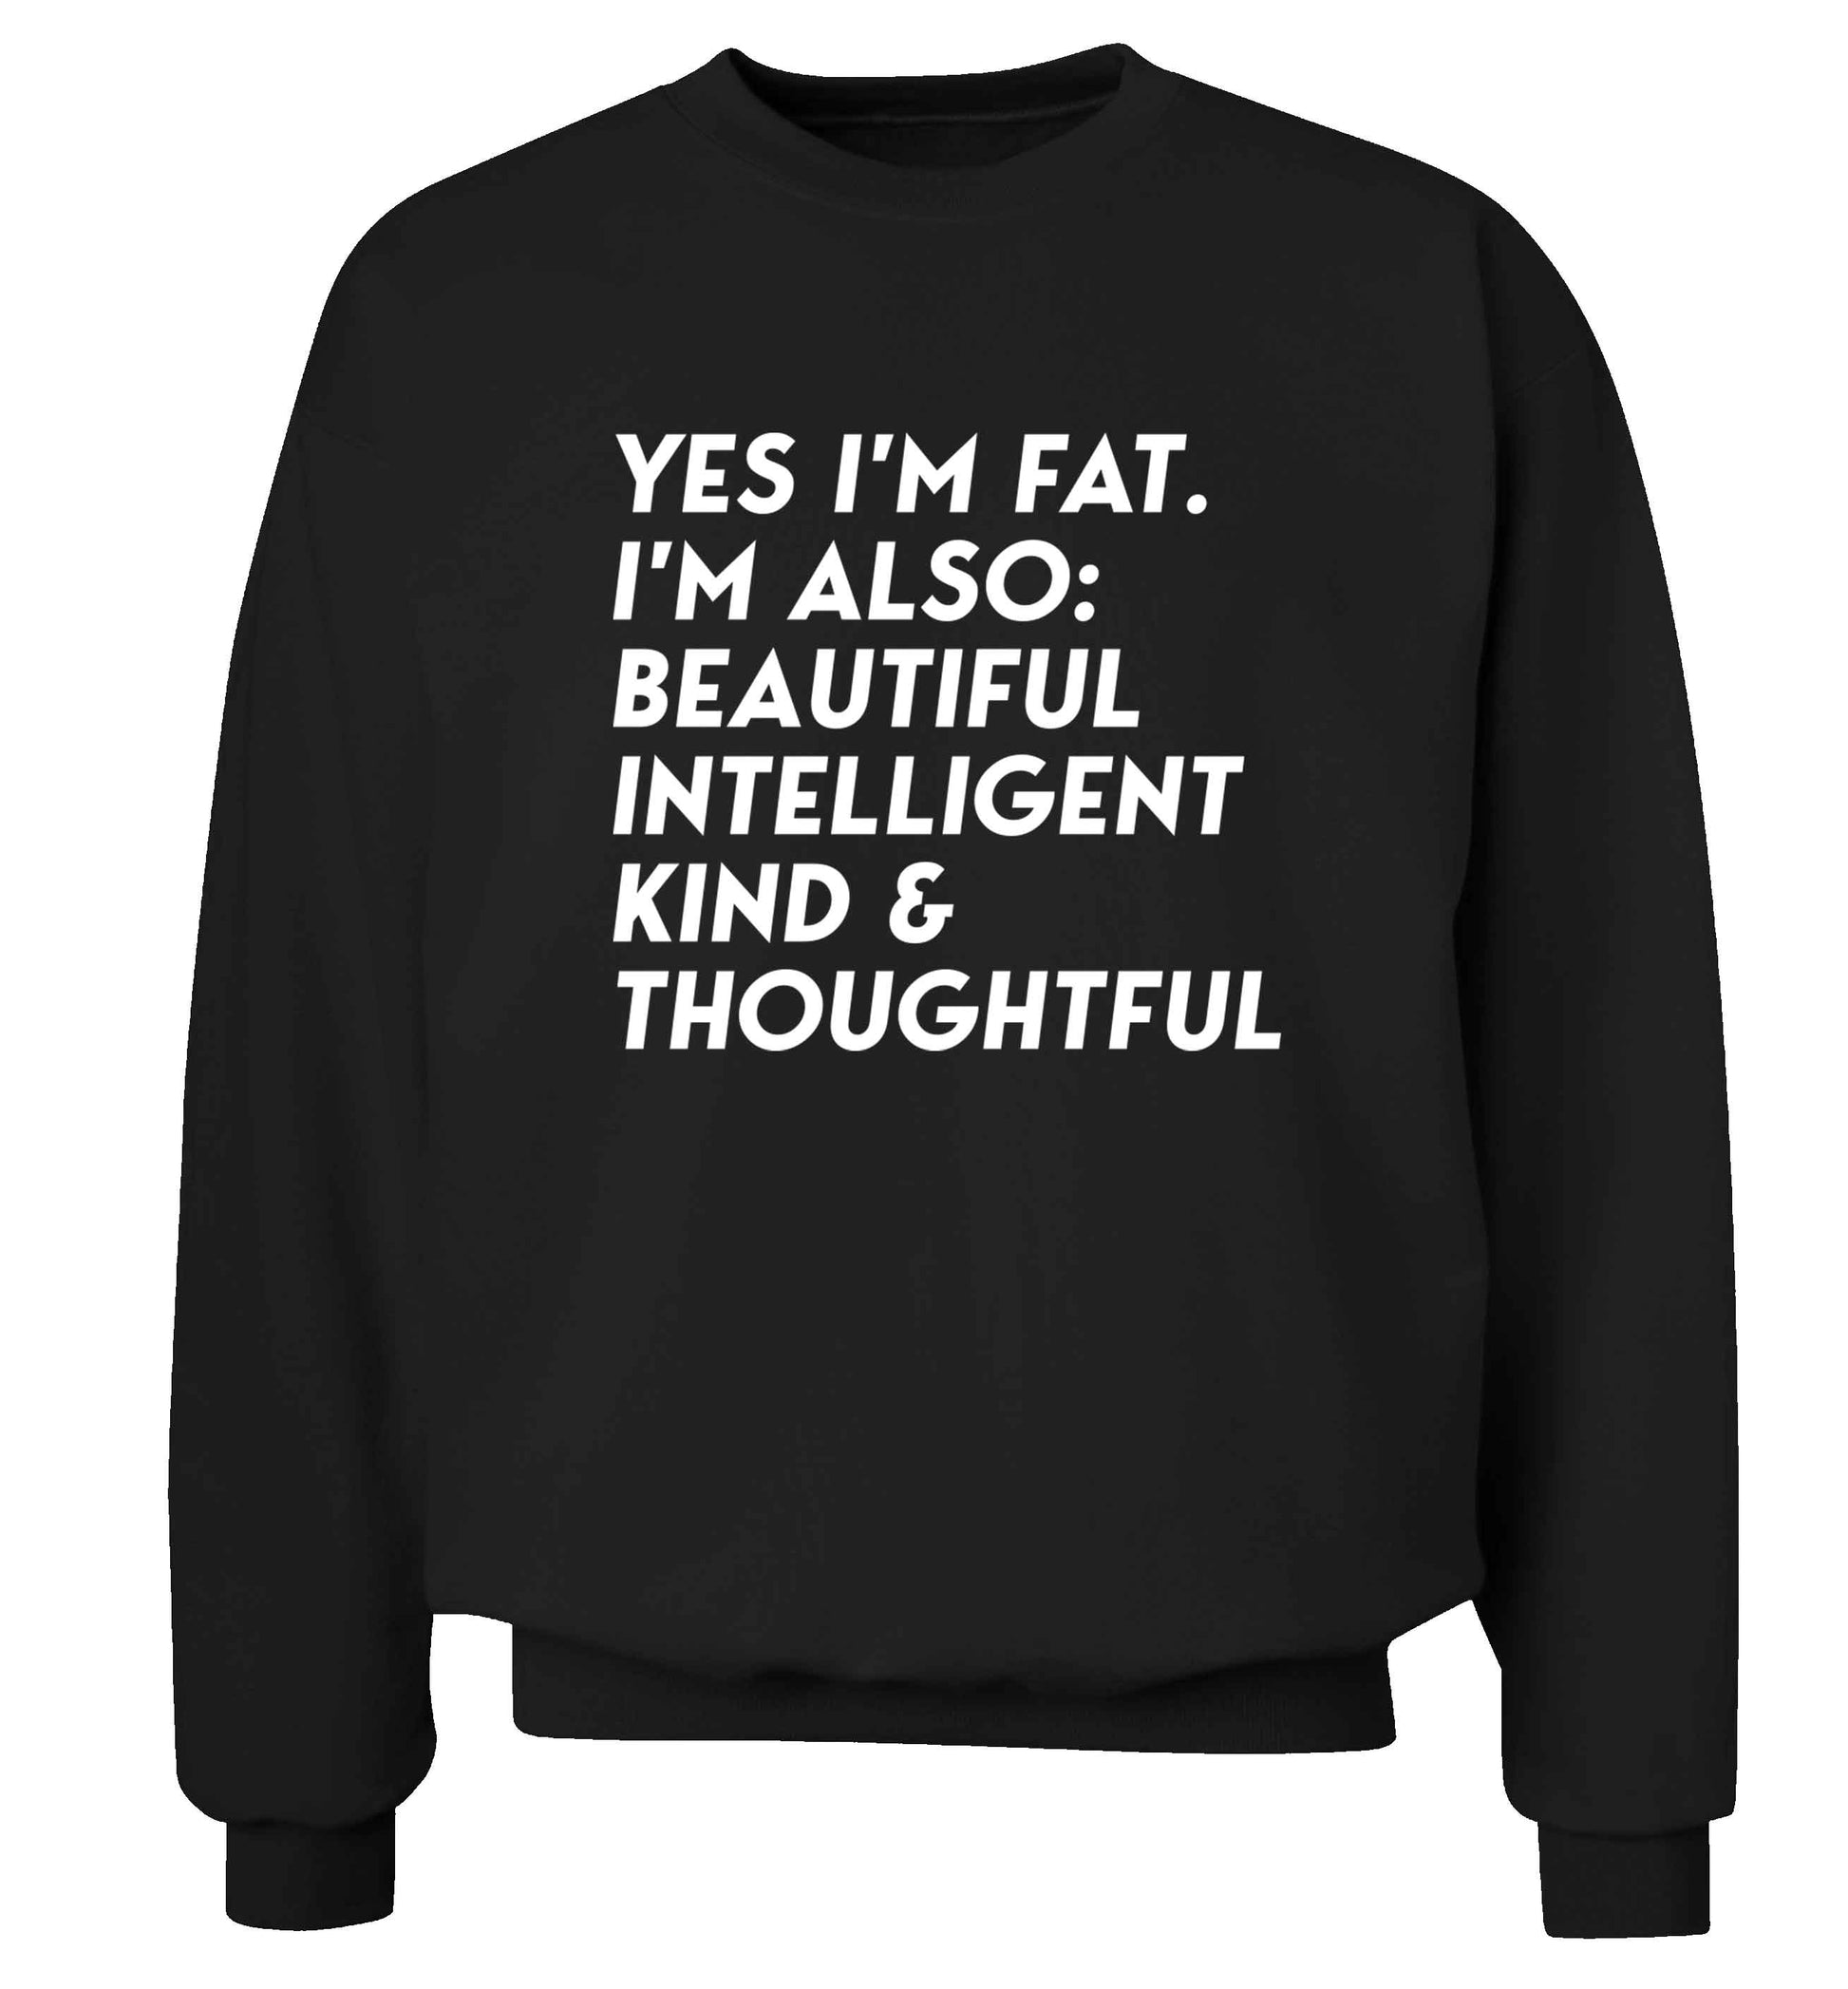 Yes I'm fat. I'm also: Beautiful intelligent kind and thoughtful adult's unisex black sweater 2XL